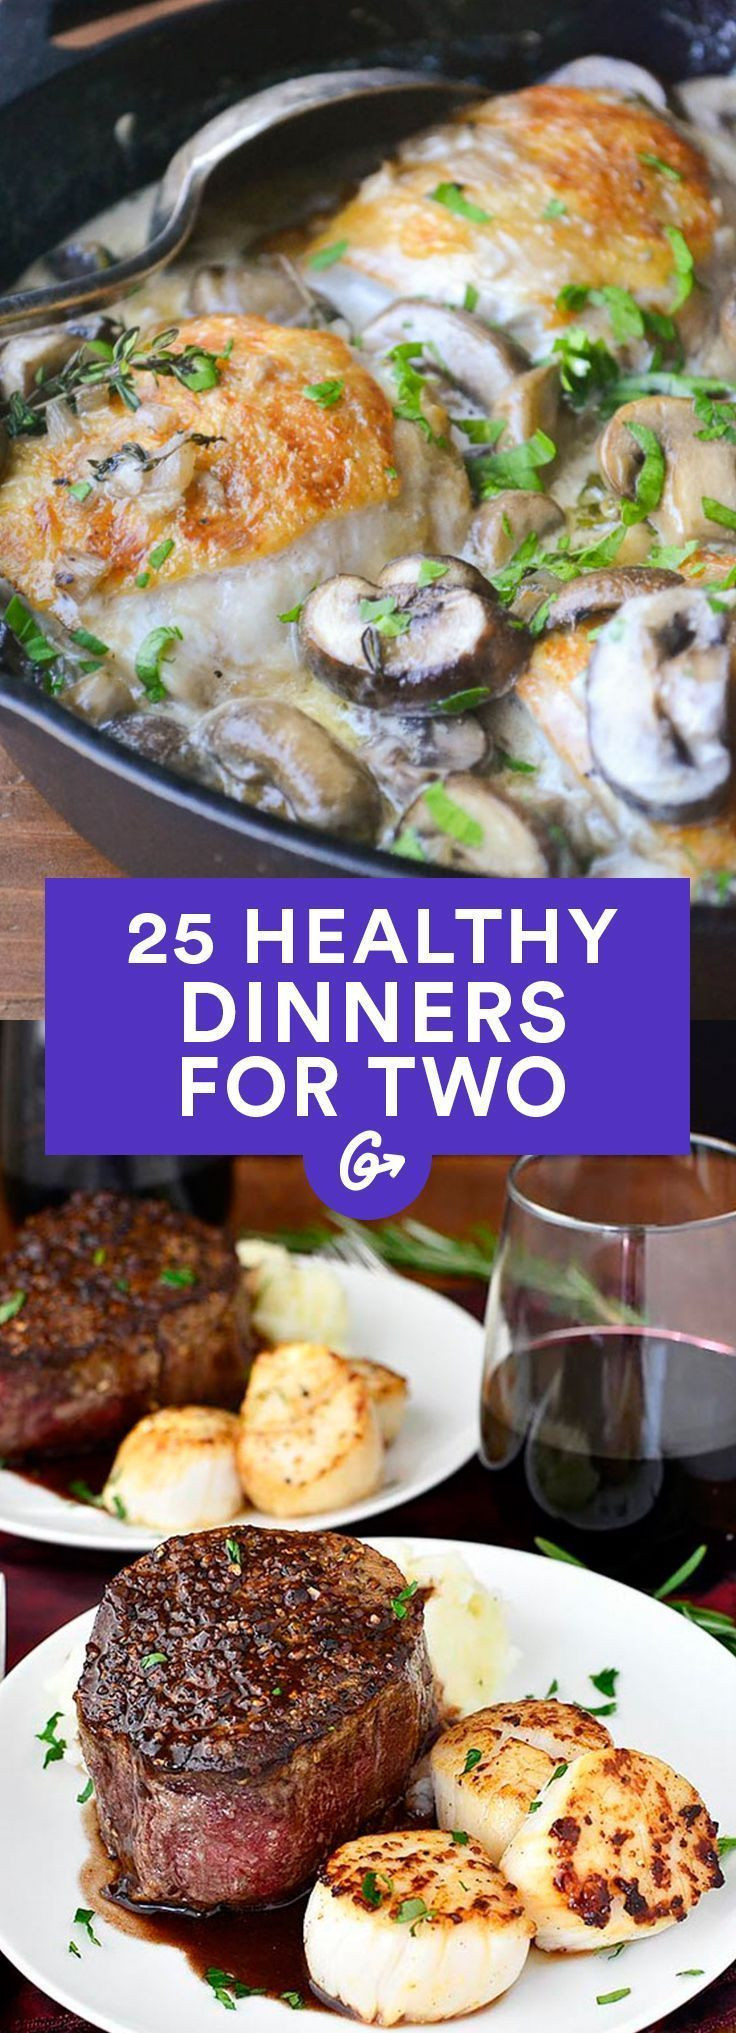 Cheap Healthy Dinners for Two Lovely Healthy Dinner Ideas for Two A Bud Dinner Ideas